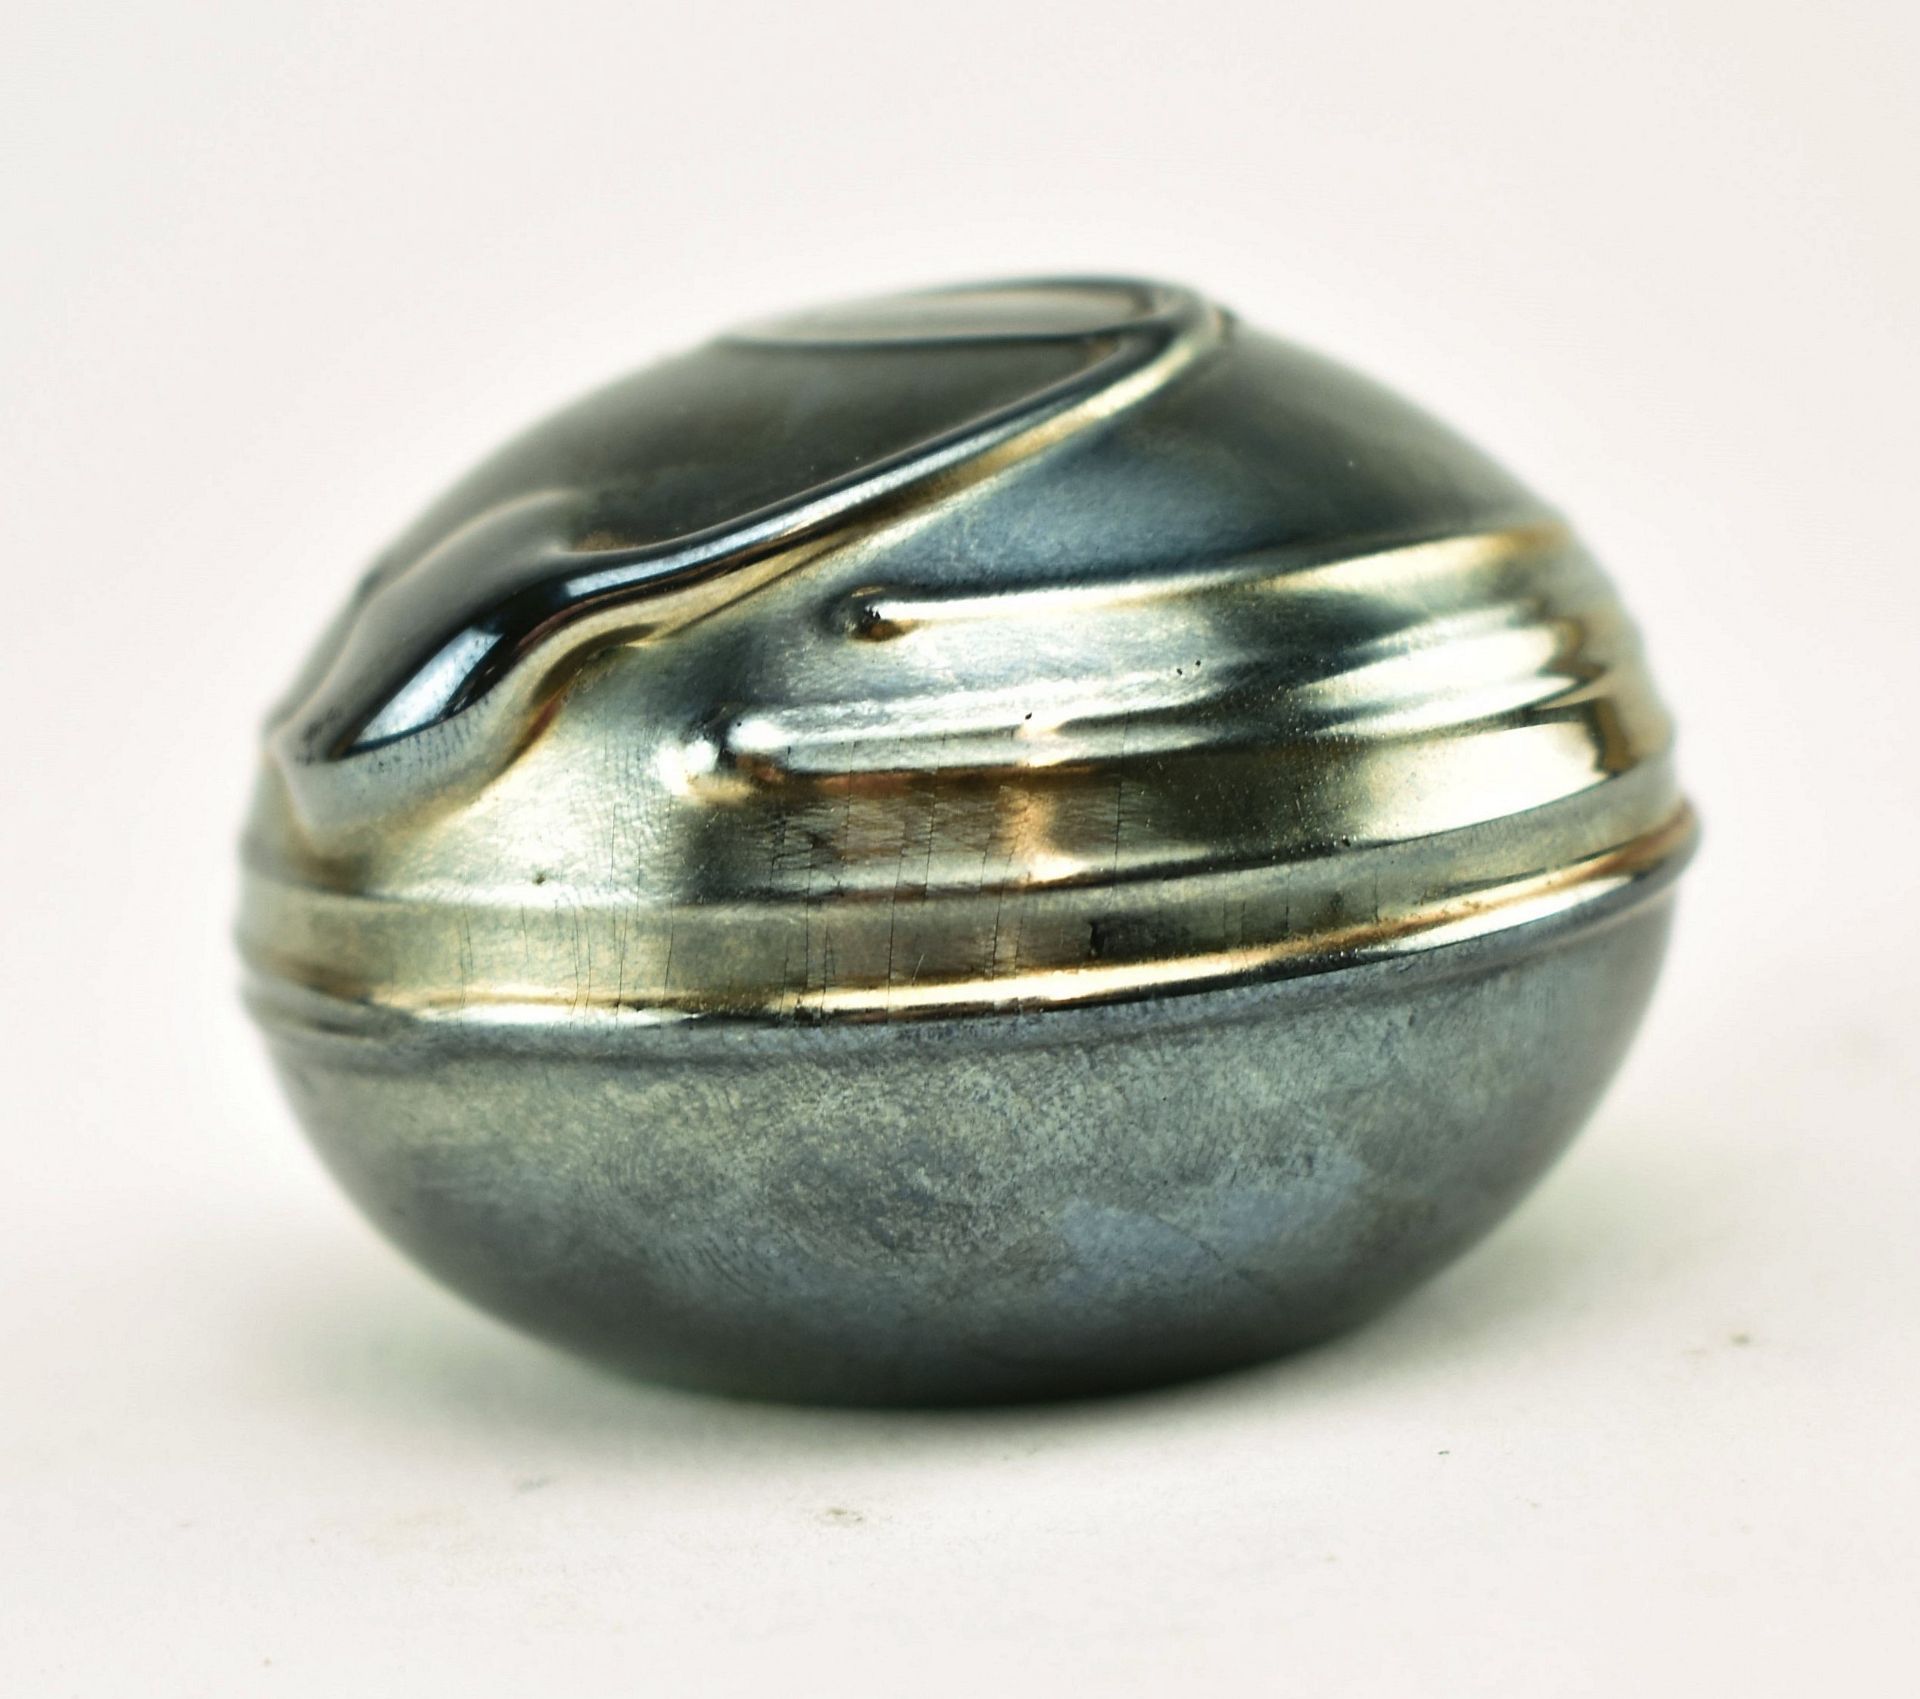 STUDIO BLUE LUSTRE GLASS PAPER WEIGHT BY PAUL BROWN - Image 3 of 5